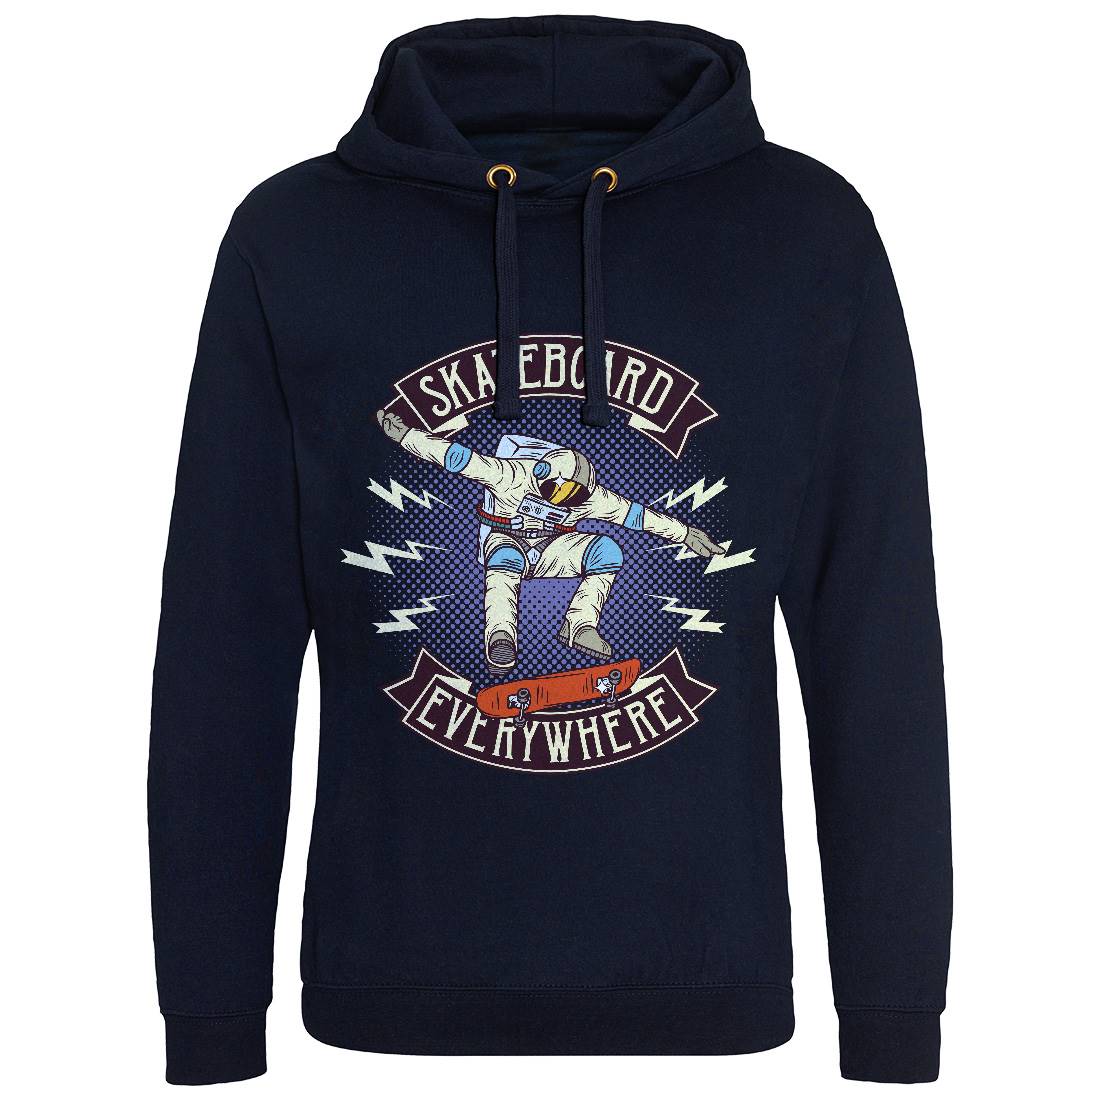 Skateboard Everywhere Mens Hoodie Without Pocket Skate D973